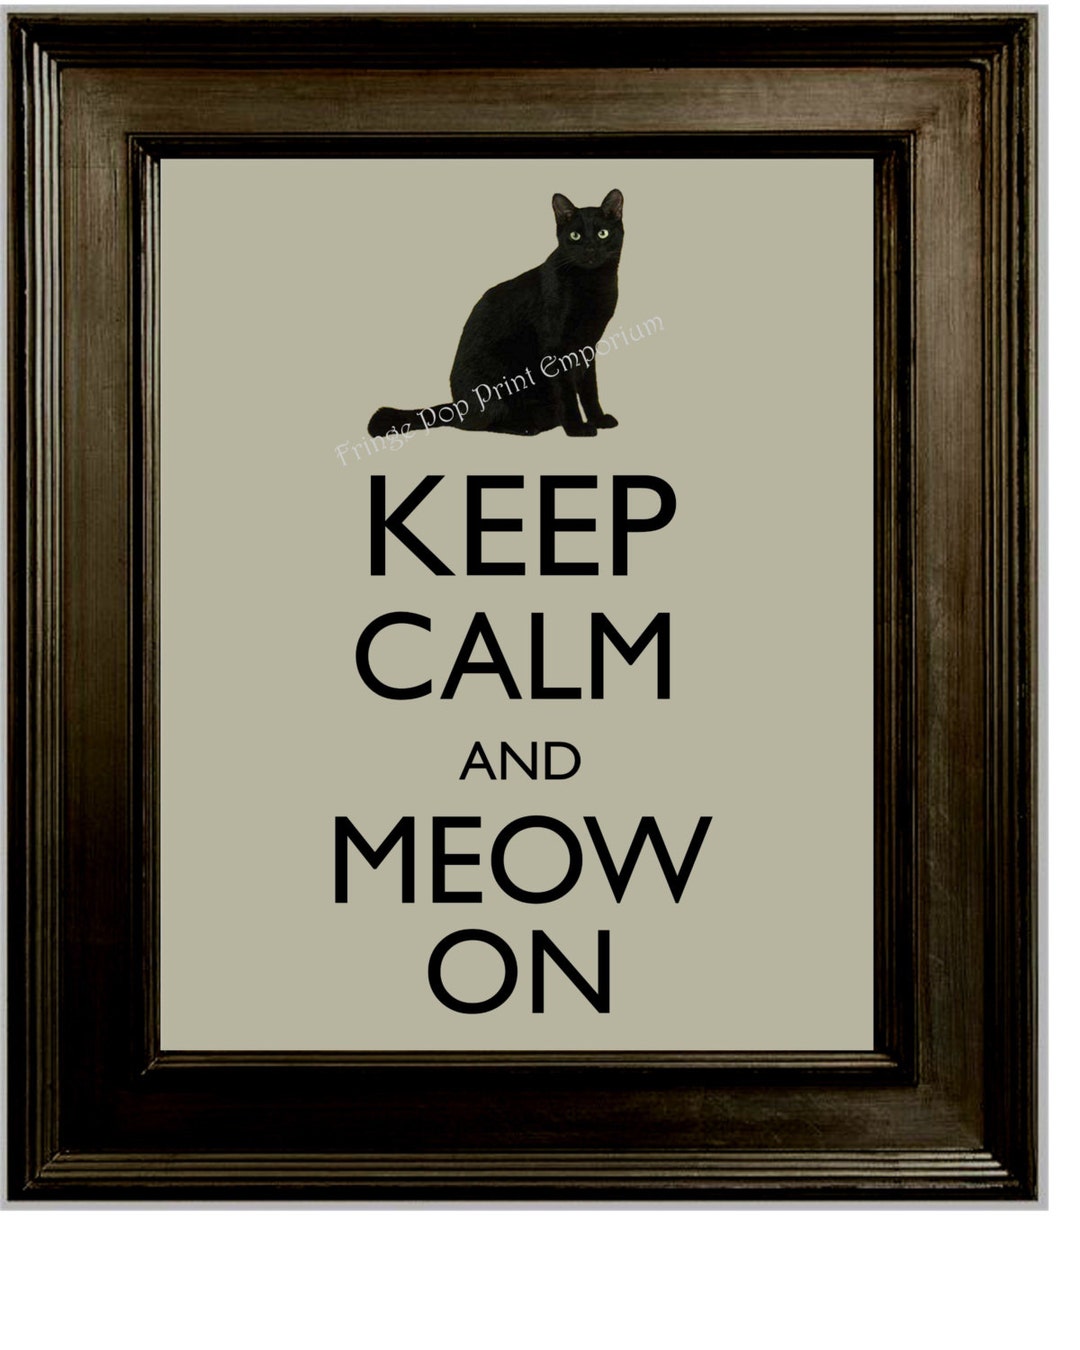 Keep Calm Cat Art Print 8 X 10 Keep Calm and Meow on Black Cat Quirky ...